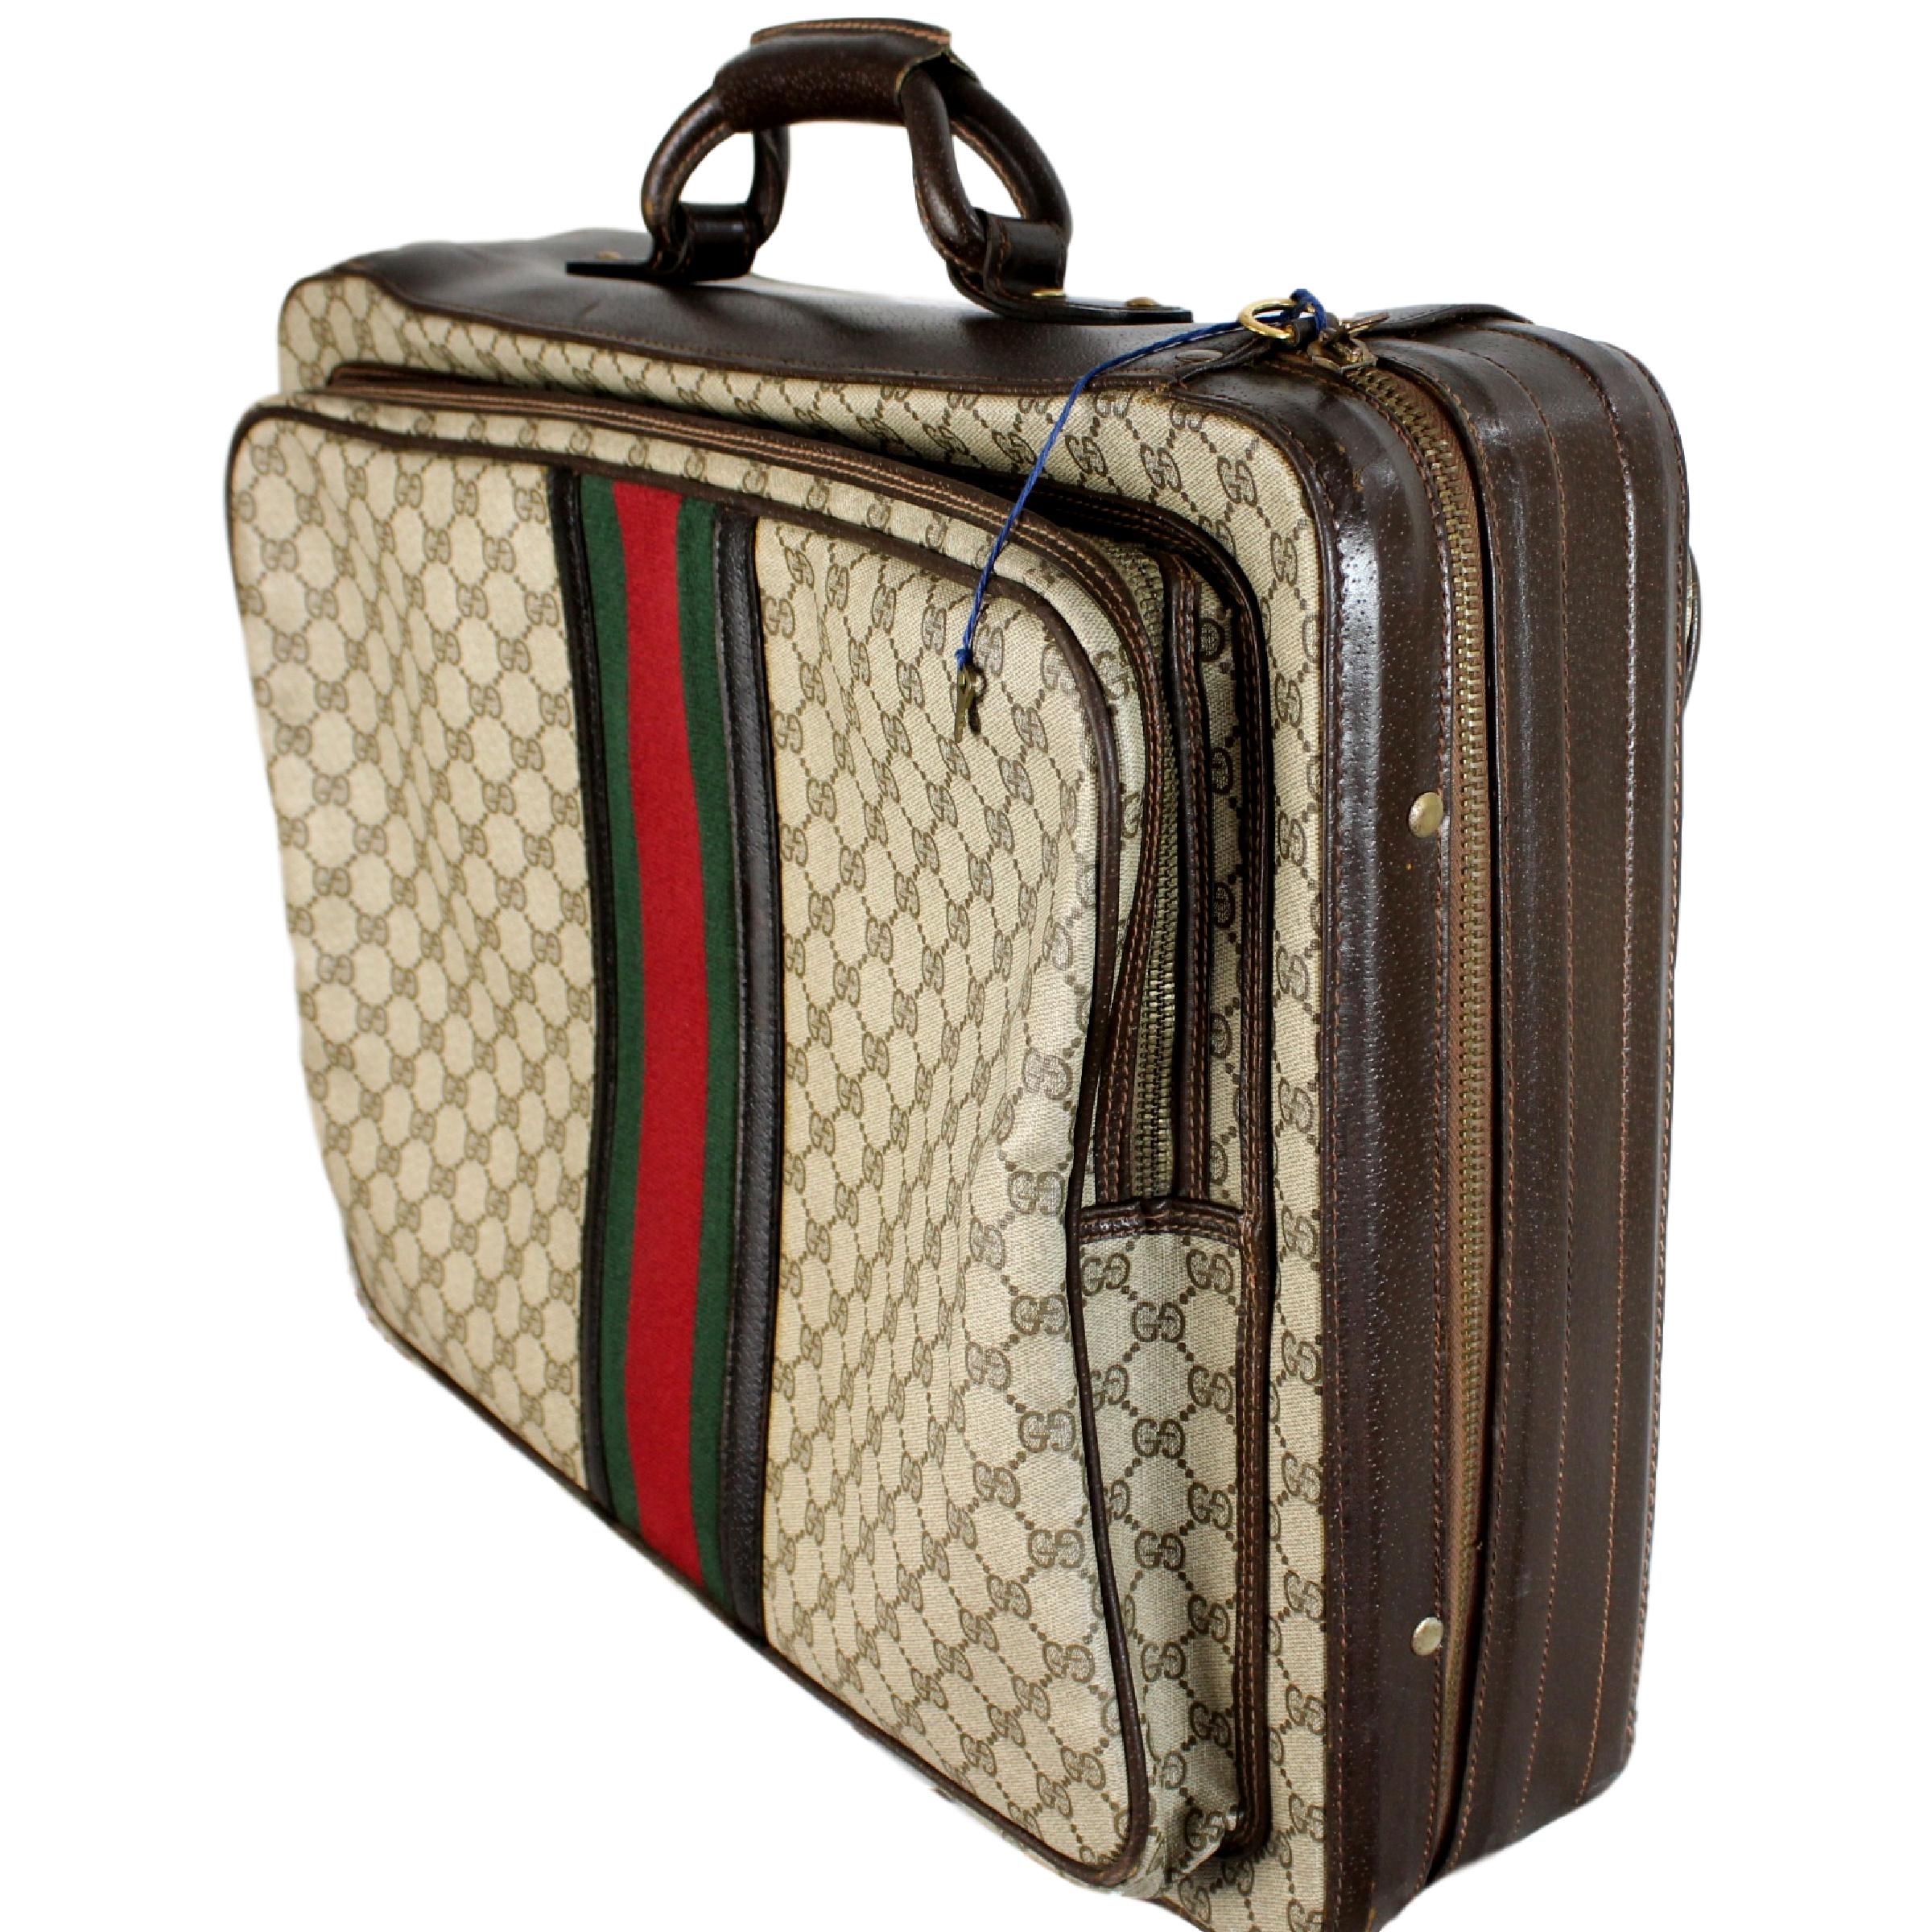 1980s Gucci Monogram Beige Leather Suitcase Luggage Bag 5